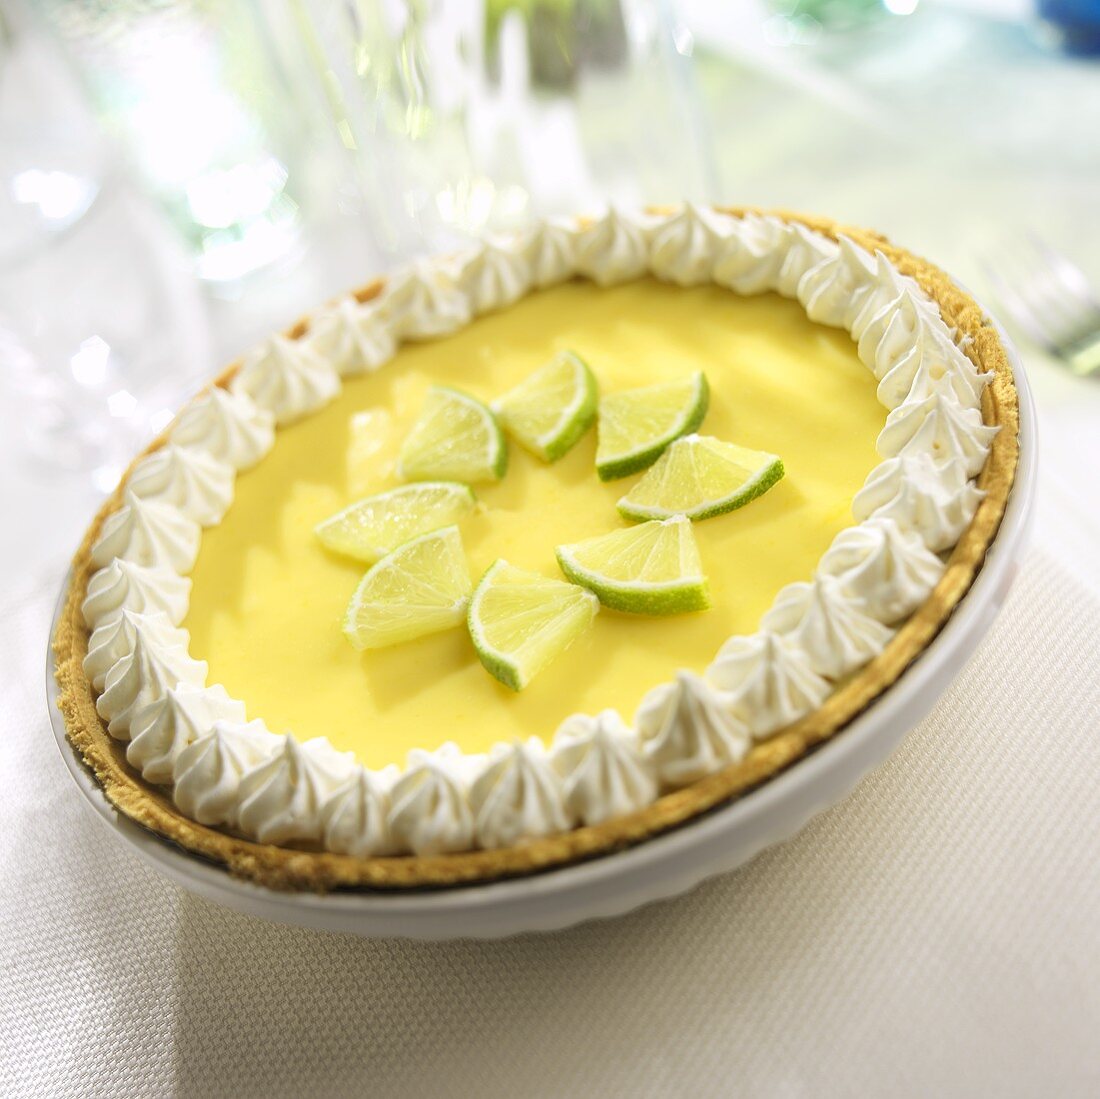 Key Lime Pie with Limes and Whipped Cream